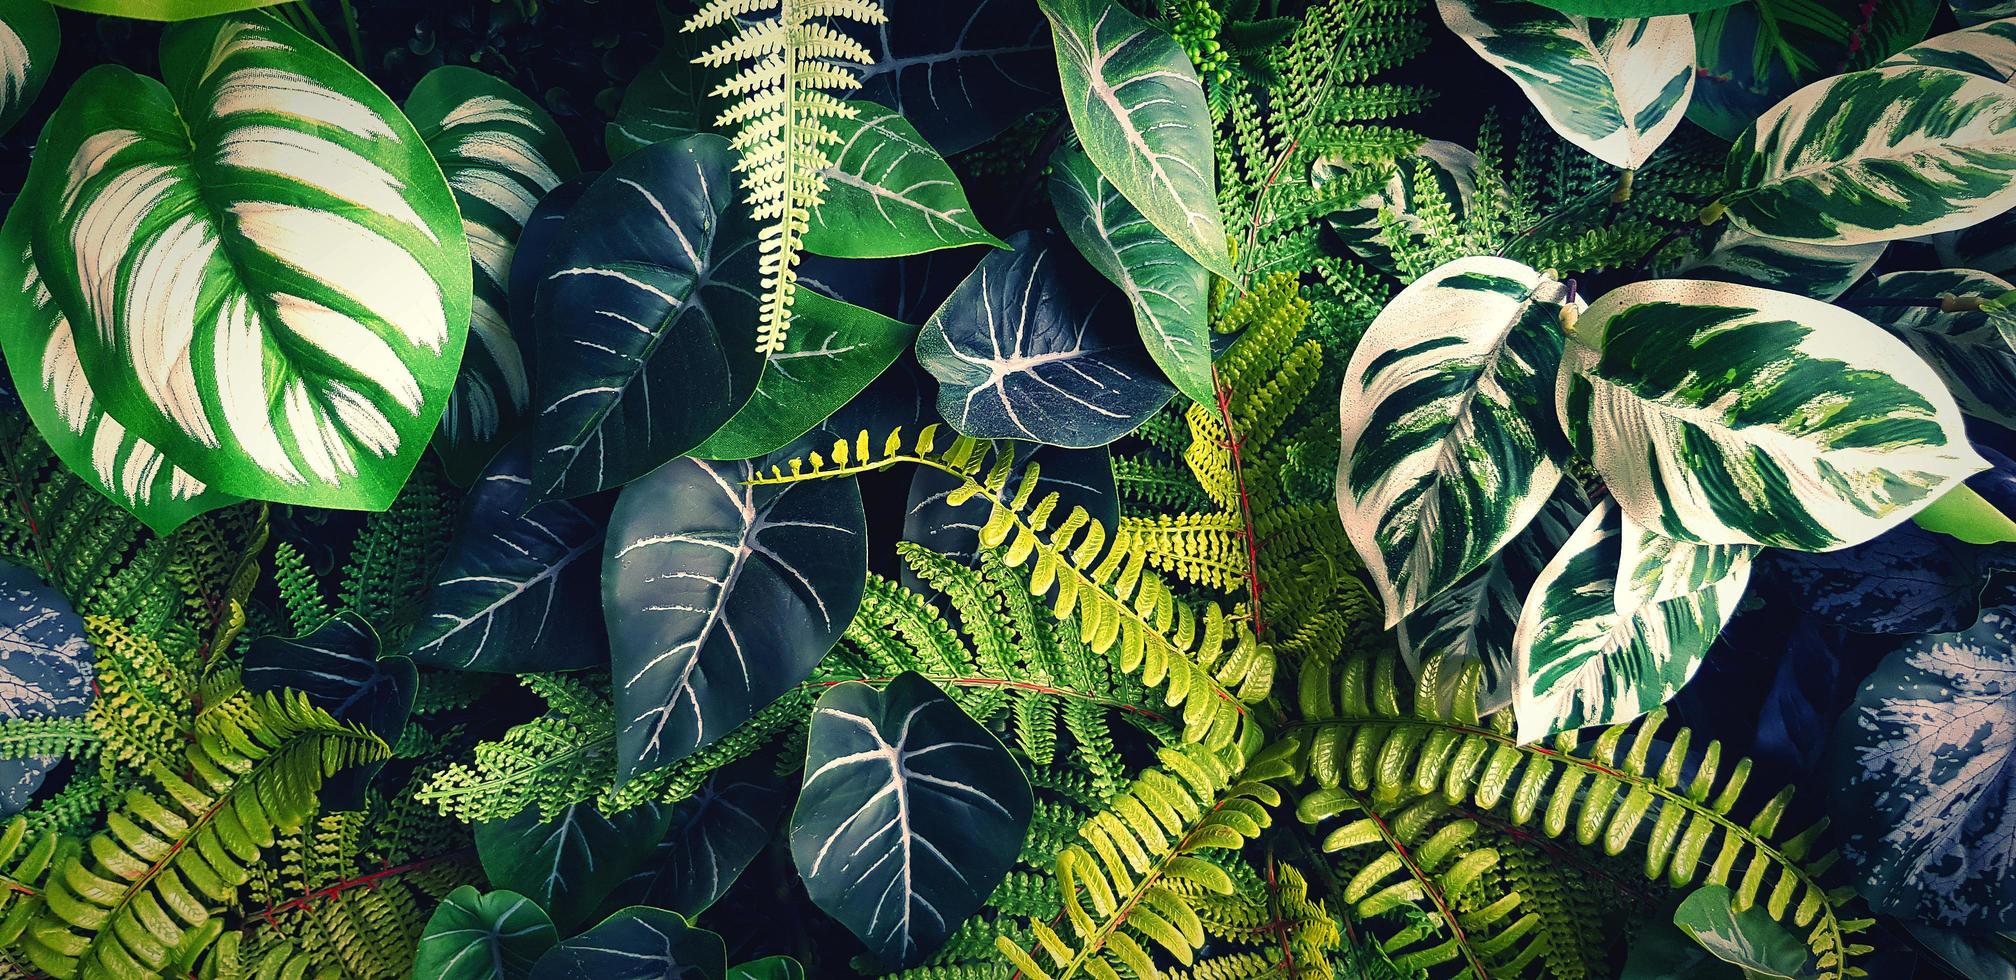 Fern and green leaves background. Plant growth or nature wallpaper. Ornamental tree for decoration in vintage or blue tone. Beautiful natural concept photo